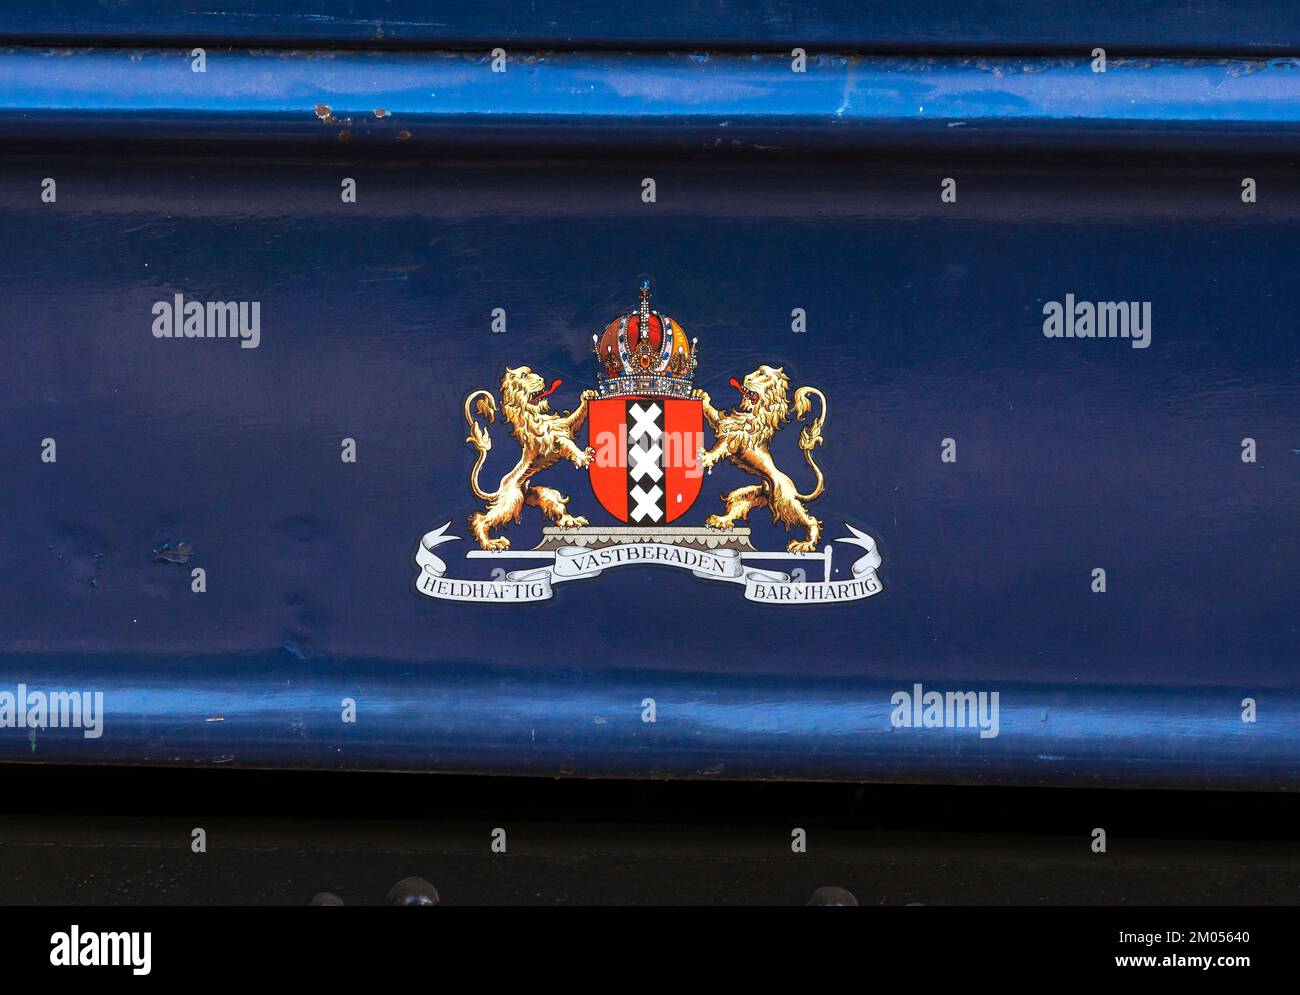 Coat of Arms on side of Amsterdam Tramways tram, East Anglian Transport Museum Stock Photo